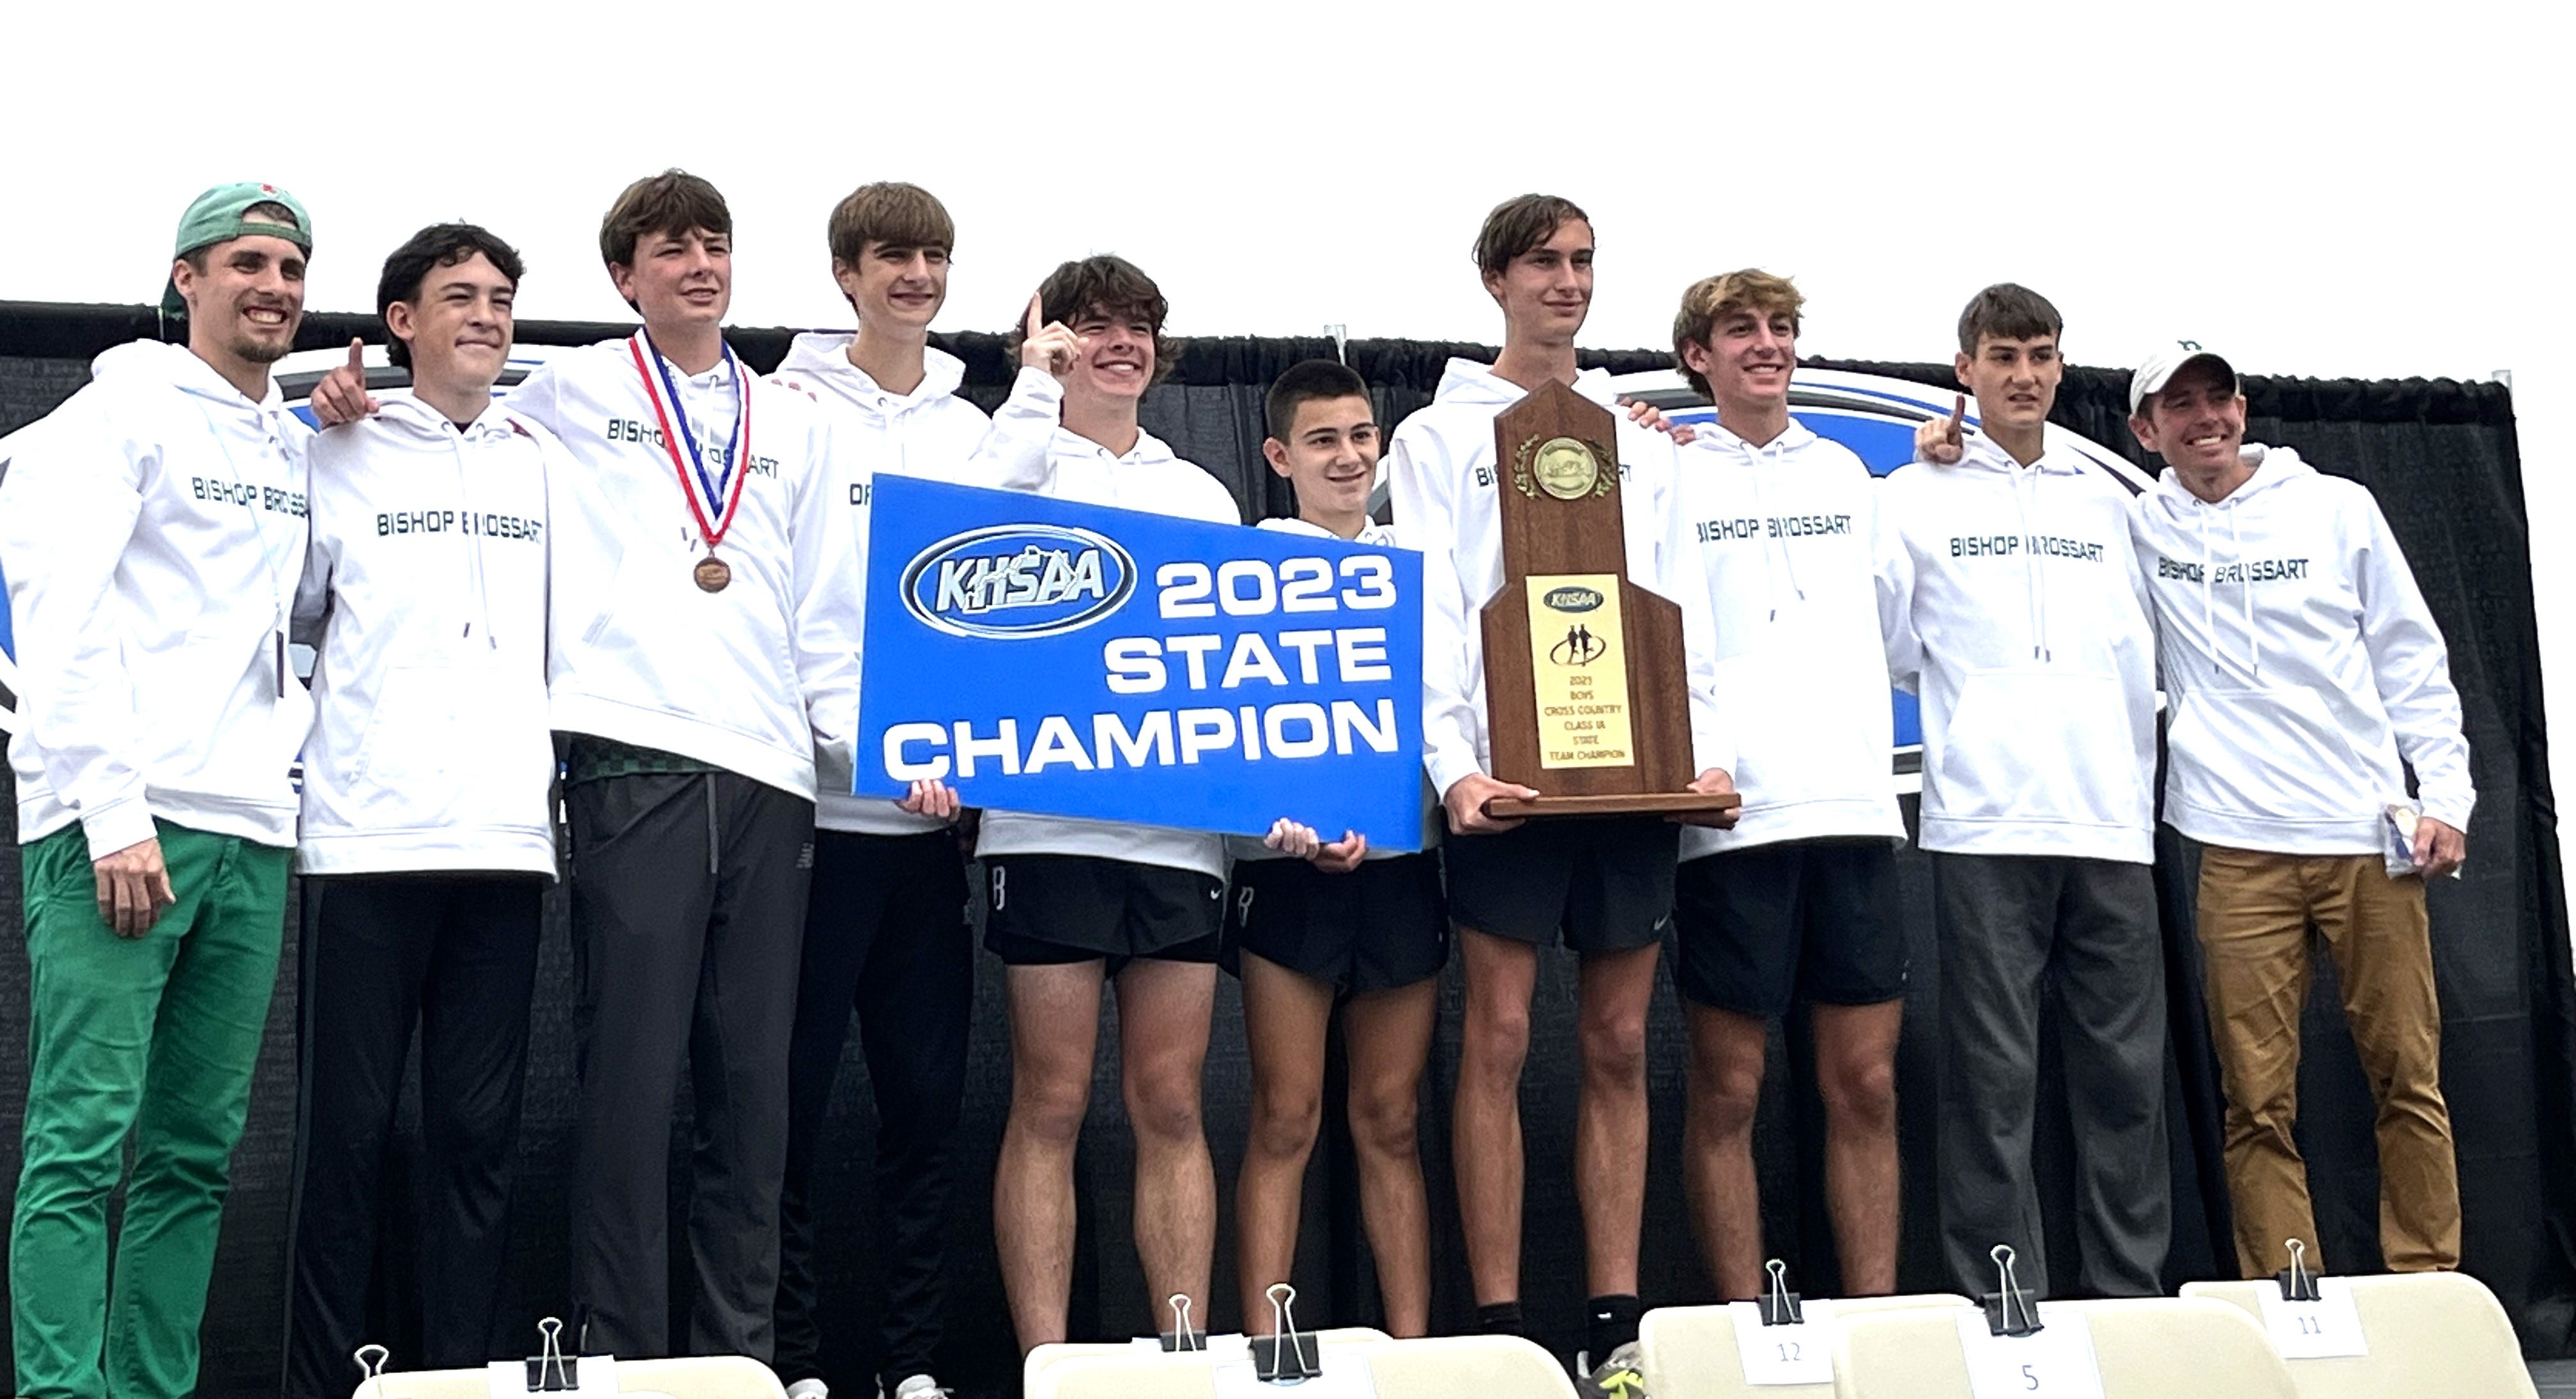 Three teams, 1 individual win state titles at Kentucky crosscountry meet